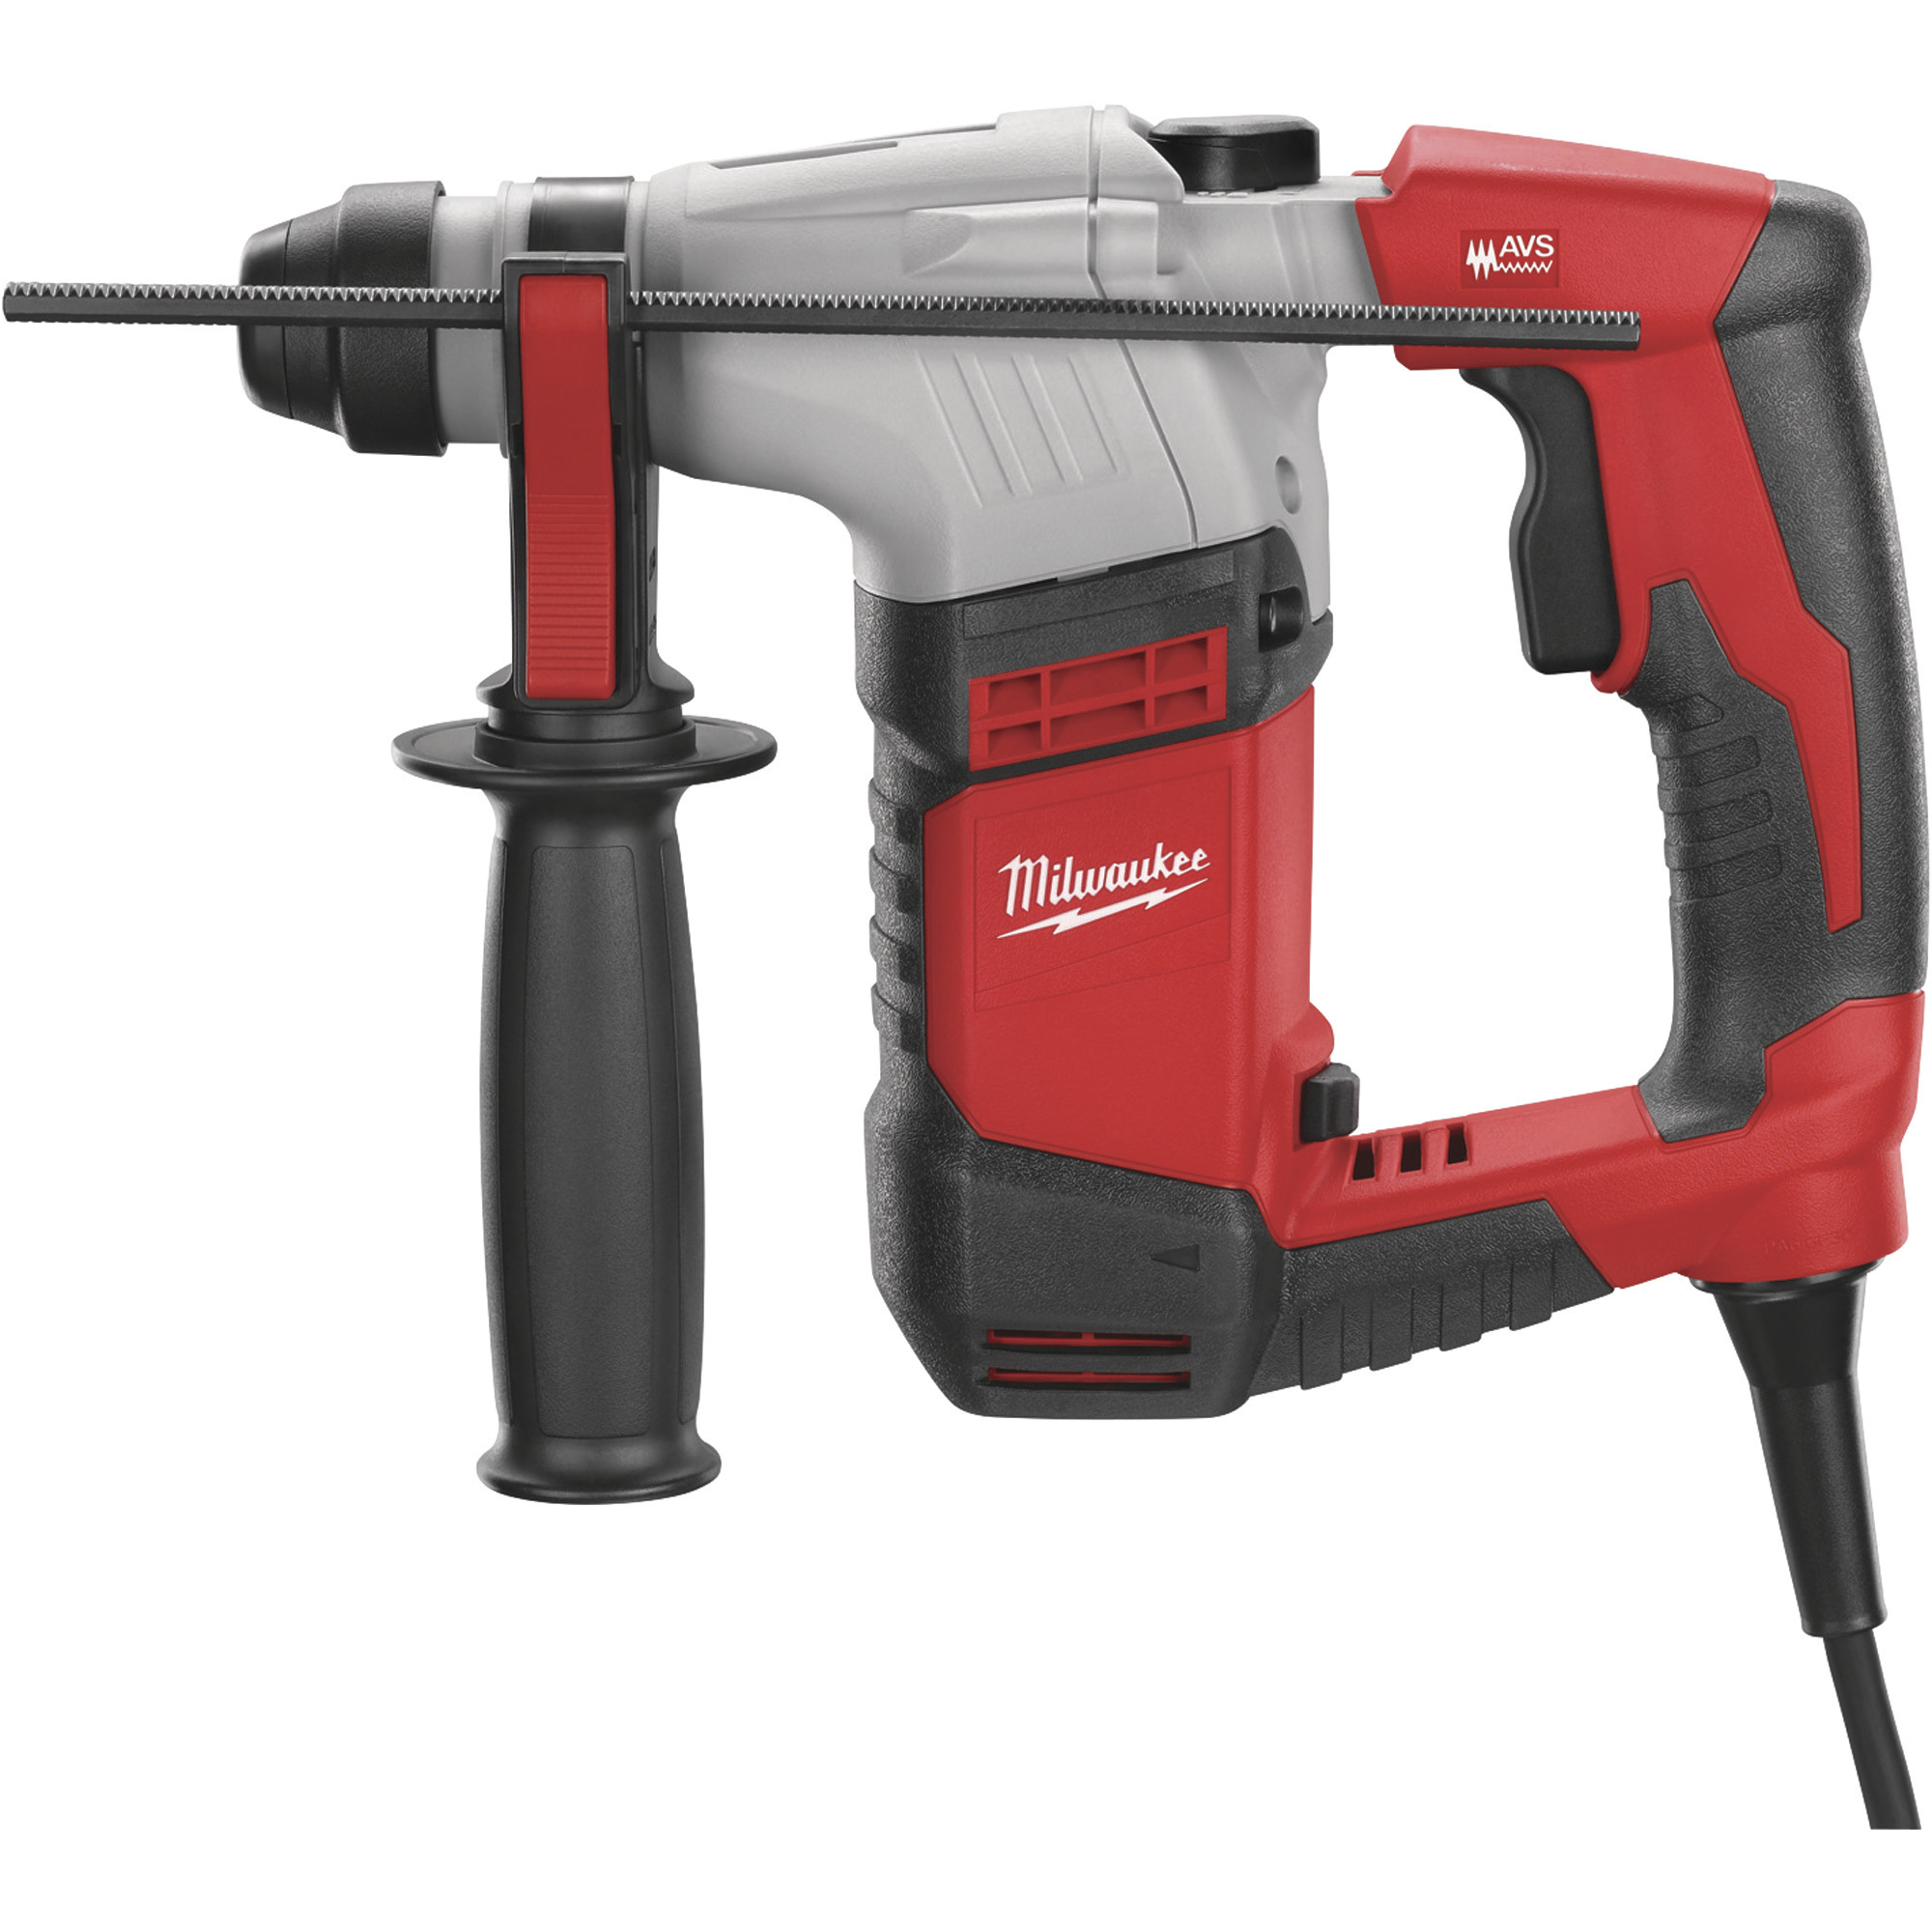 Milwaukee Corded SDS+ Rotary Hammer Drill — 5/8in. Chuck, 4400 BPM, 3700  RPM 5.5 Amp, 1.5 Ft./Lbs., Model# 5263-21 Northern Tool